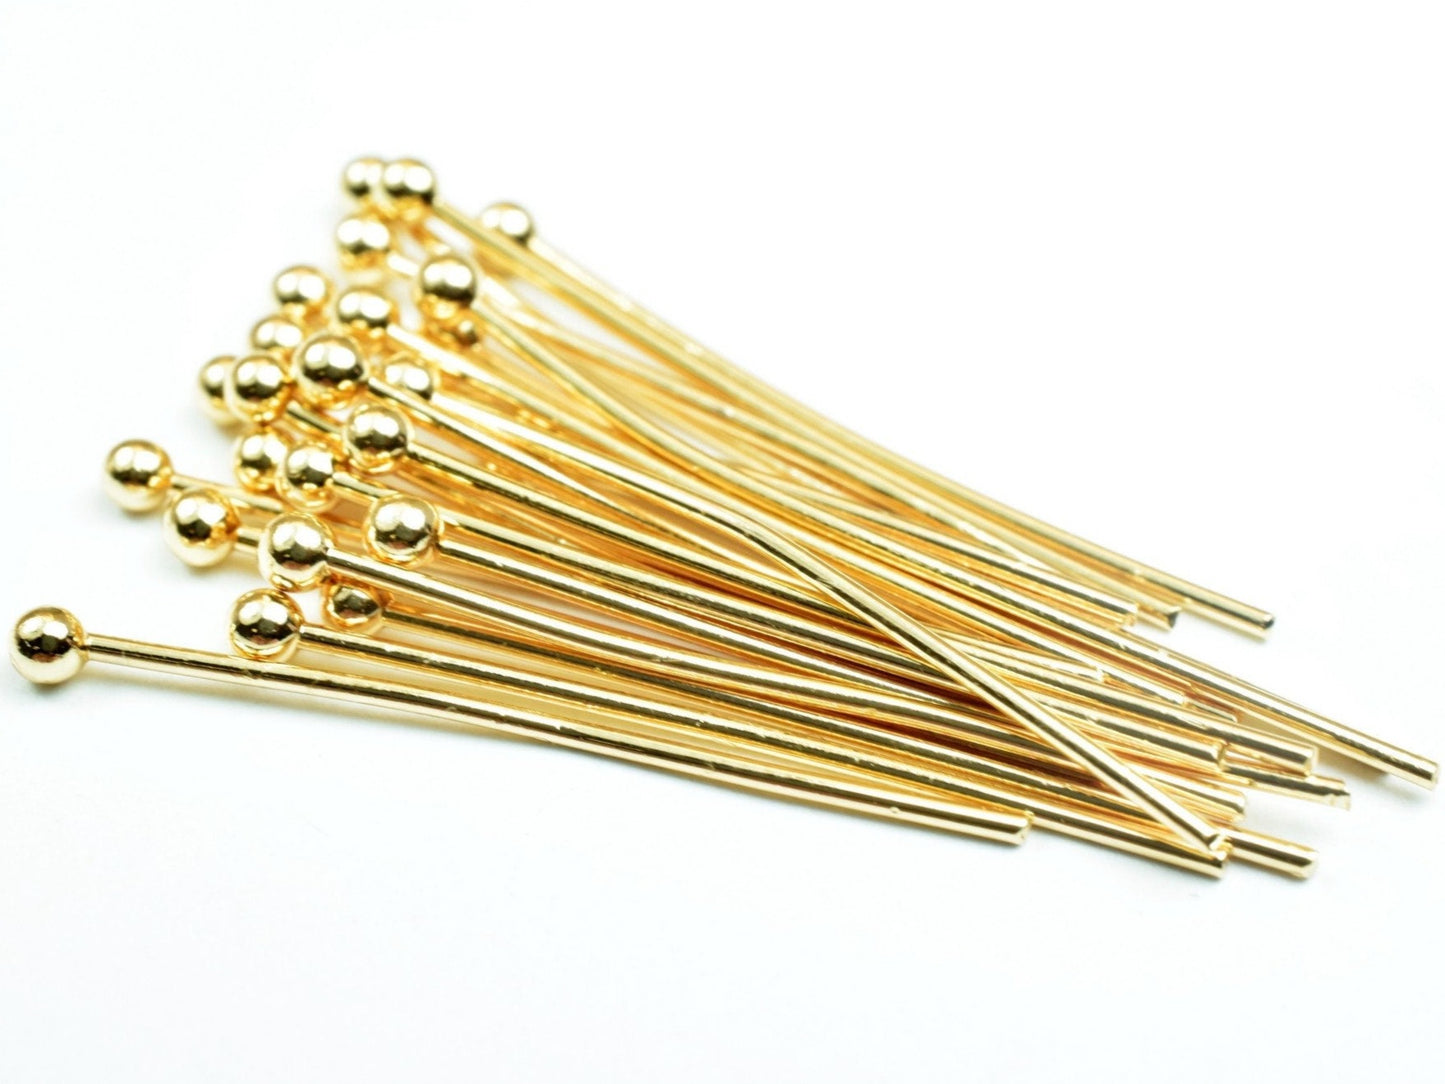 Round Head Pin Gold Filled EP 18k/14K from 1/2 inch to 3 1/2 inch findings for jewelry making and wholesaler from 13mm to 85mm BeadsFindingDepot